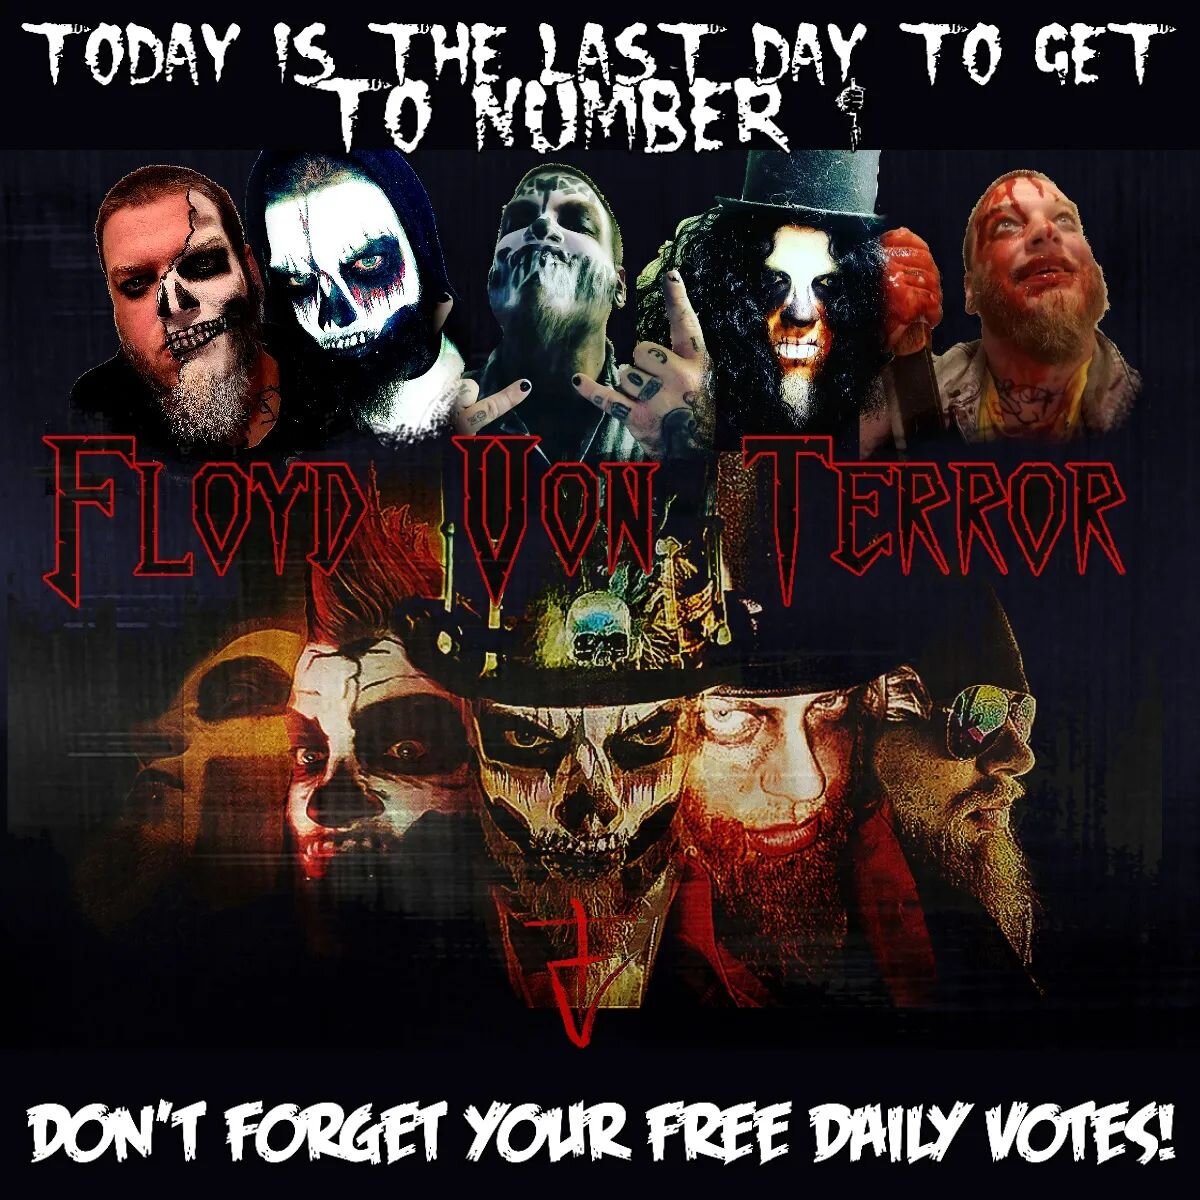 https://faceofhorror.org/2022/floyd-dalton
If I can't get to number 1 in the next 10 hours I won't be moving on to face the other number 1s from their groups. If you are able, please help. Love you all and this has been a wild ride already. And if yo